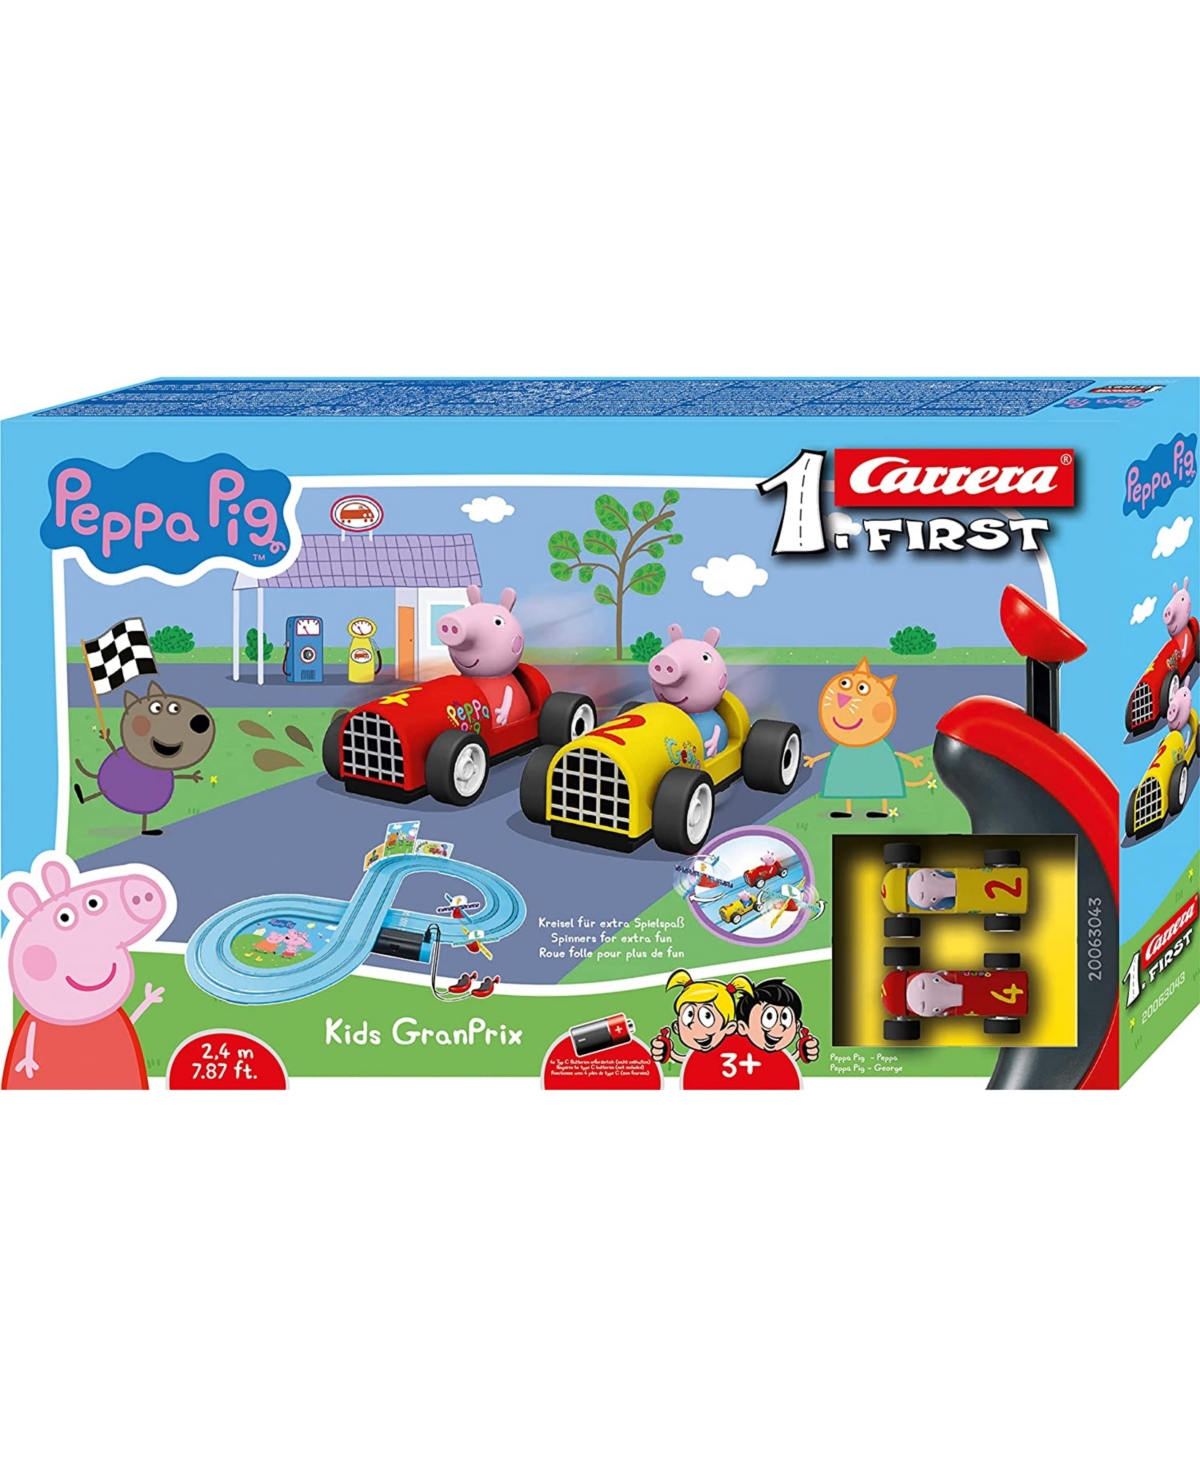 Shop Carrera First Peppa Pig Kids Granprix Spinner Slot Car Race Track In No Color